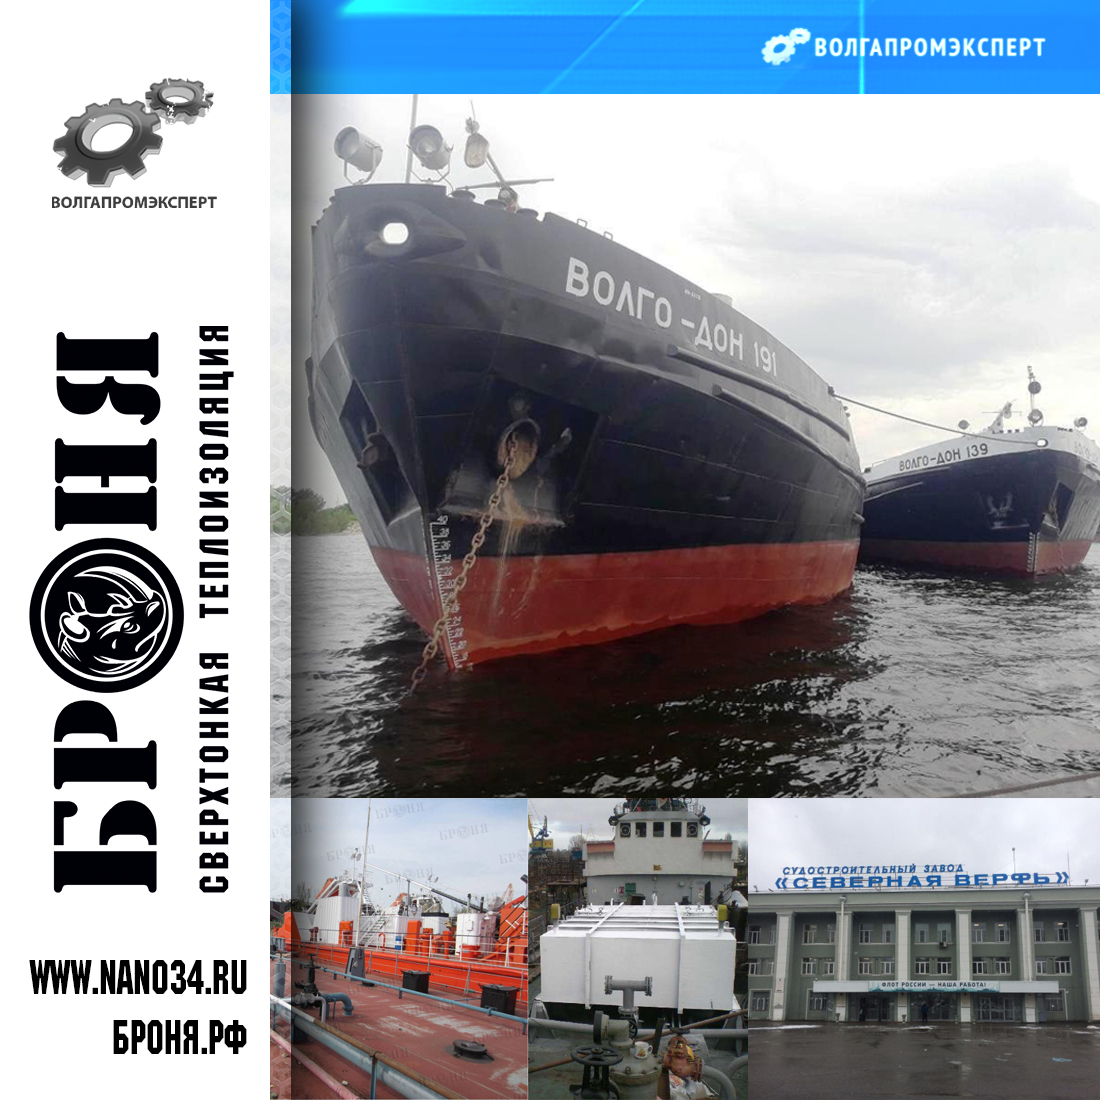 Volgograd "Bronya" has been approved by the Russian River Register! An article on the VolgaPromExpert portal. (Photo)